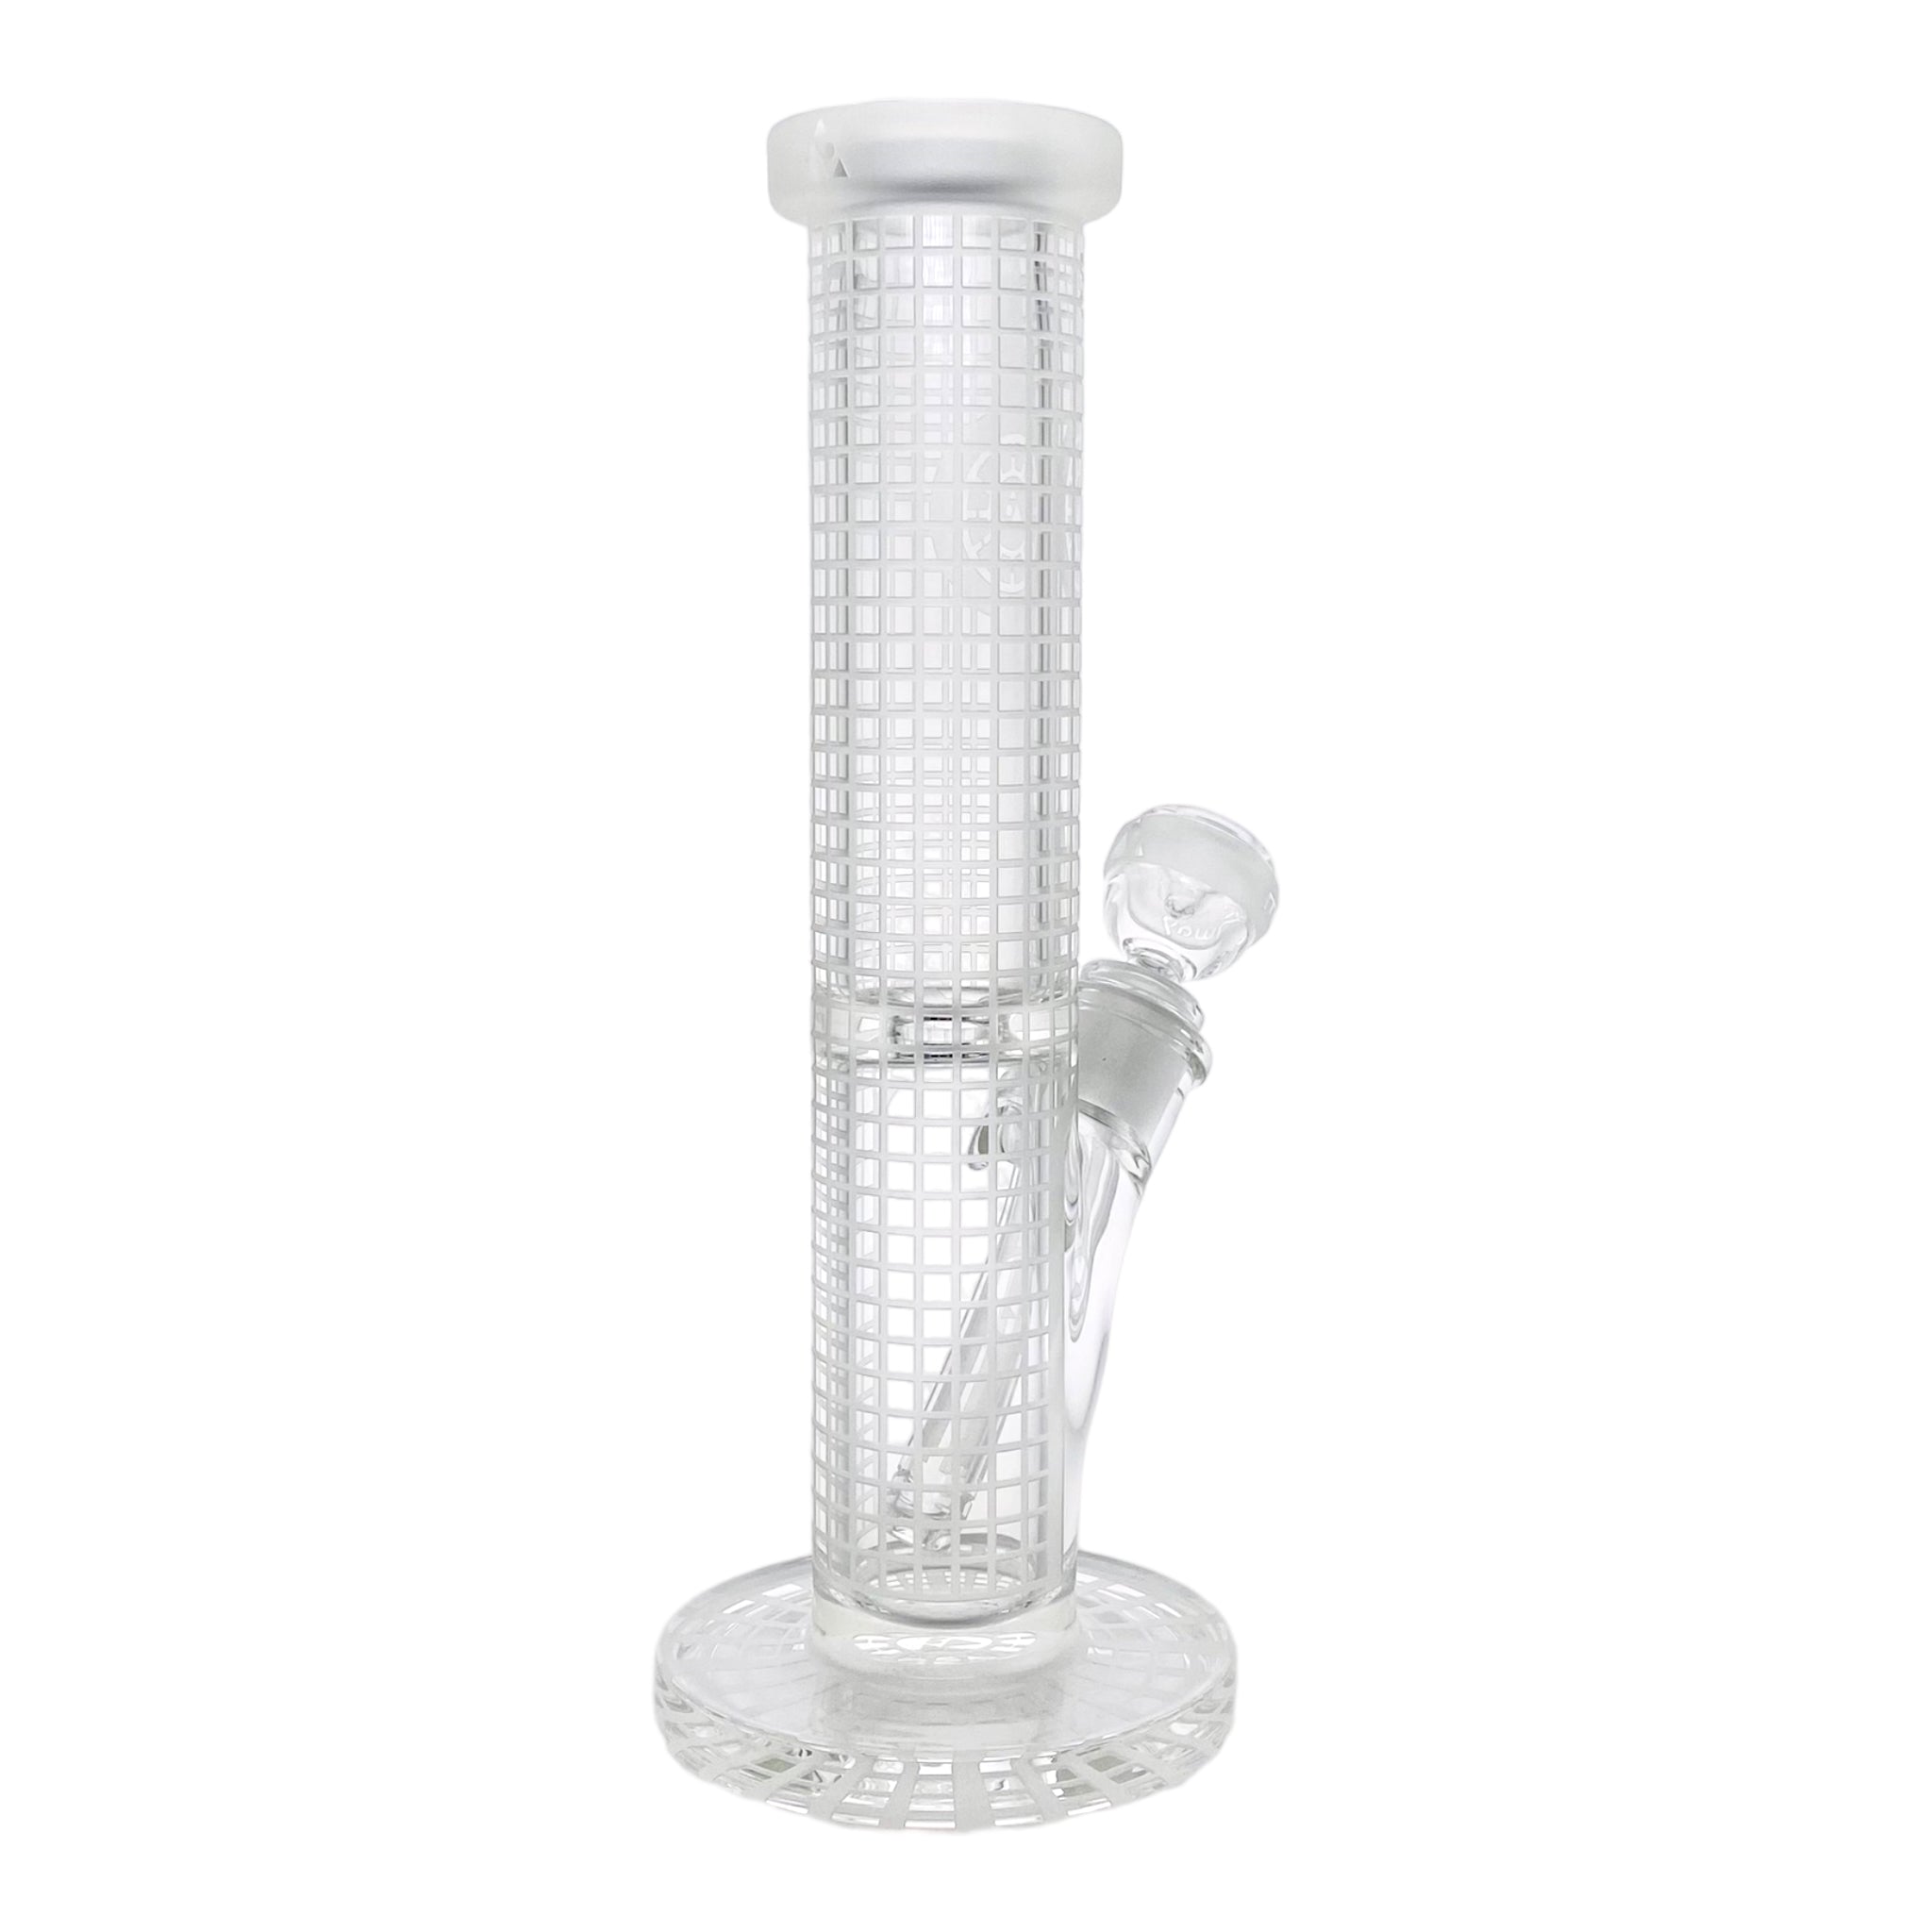 Milkyway Glass 12 Inch "Squared" Straight Tube Glass Bong